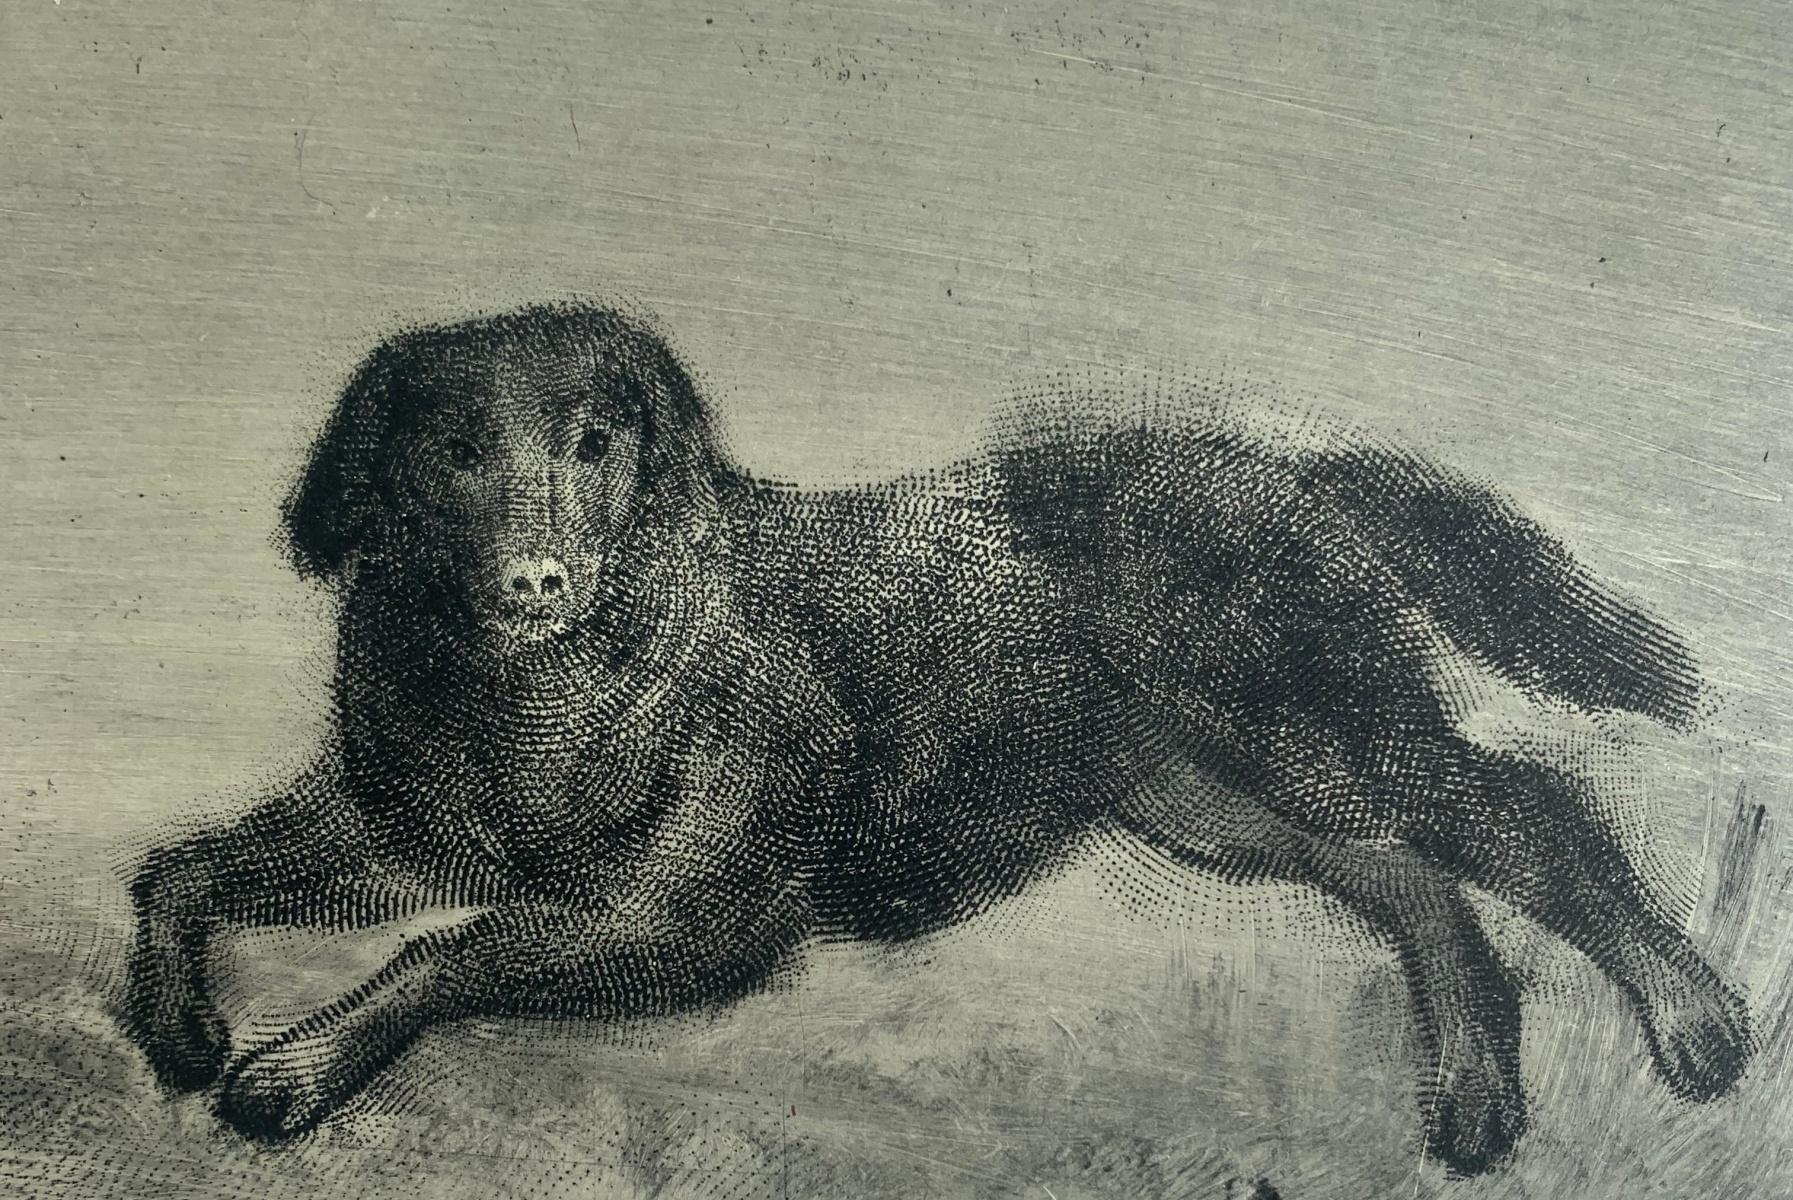 Contemporary figurative etching print by Polish arist living in Canada, Pawel Zablocki. Print depicts dogs Tofcia and Turbo, one is laying down and looking in viewer's direction while the other one is shown sideways. Artist's unique technique of